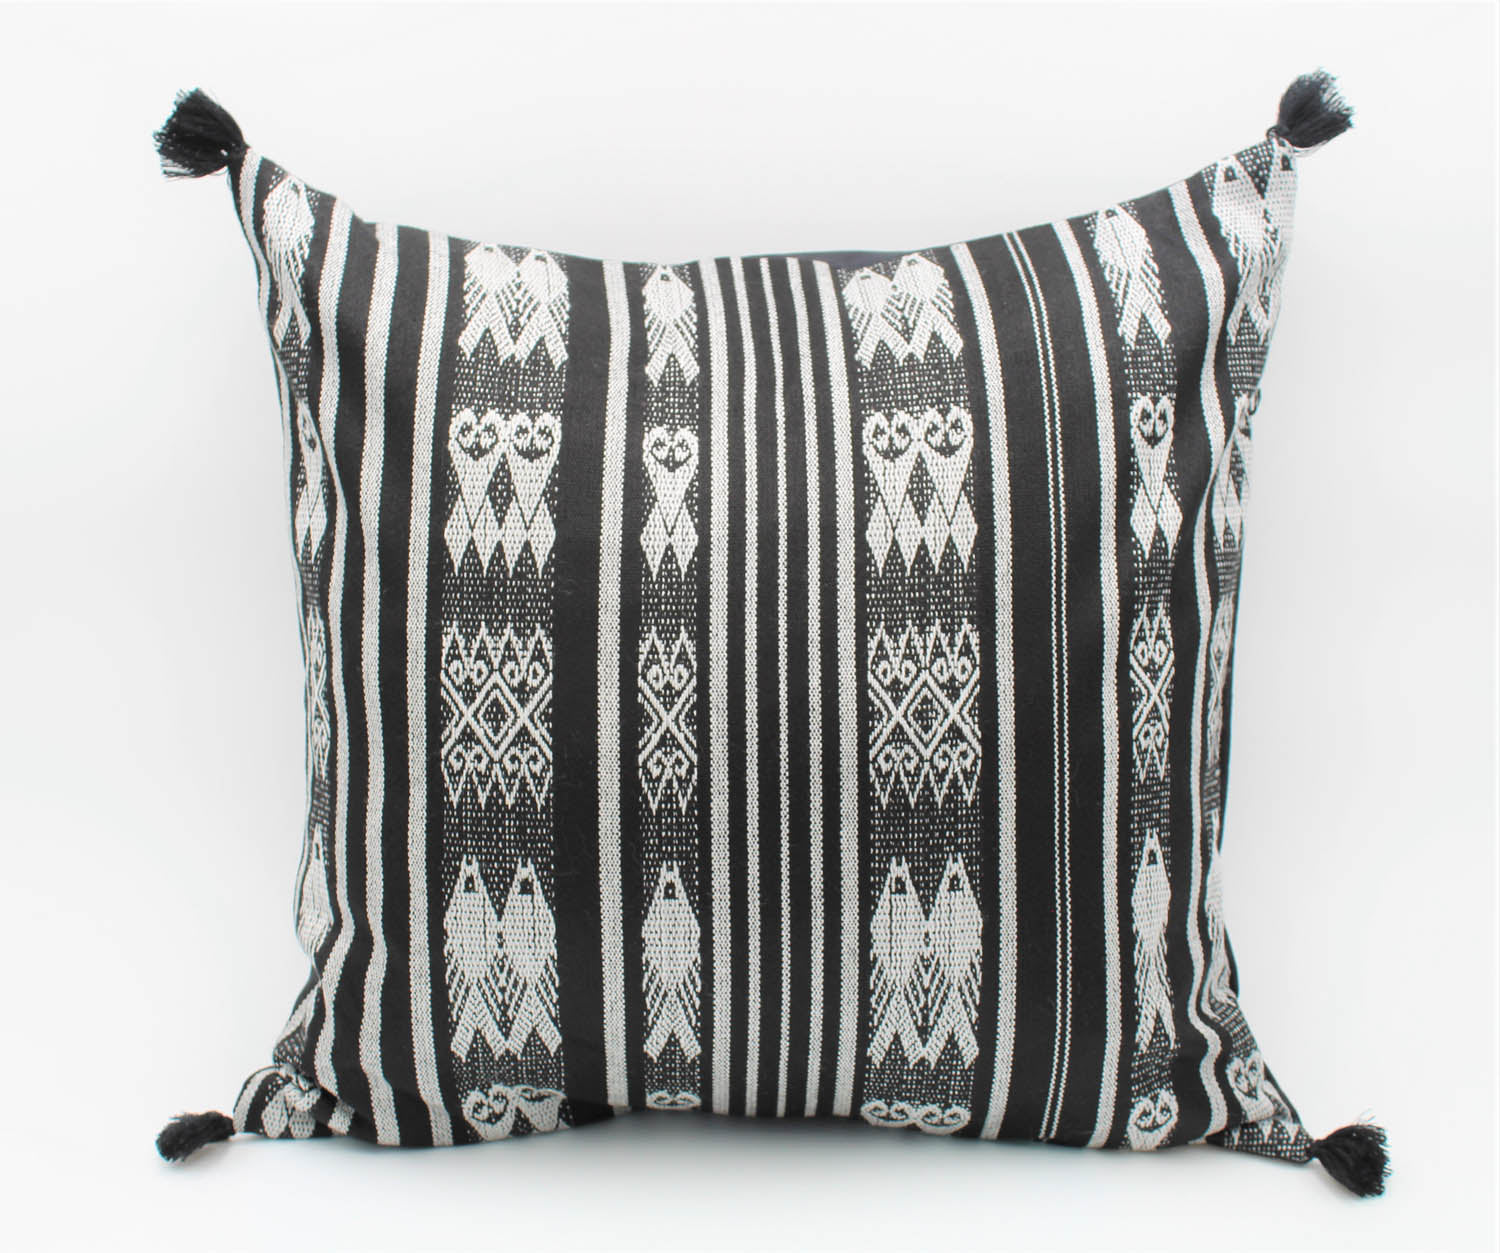 El Mar Pillow Collection: Black and White Fish with Black Tassels 2